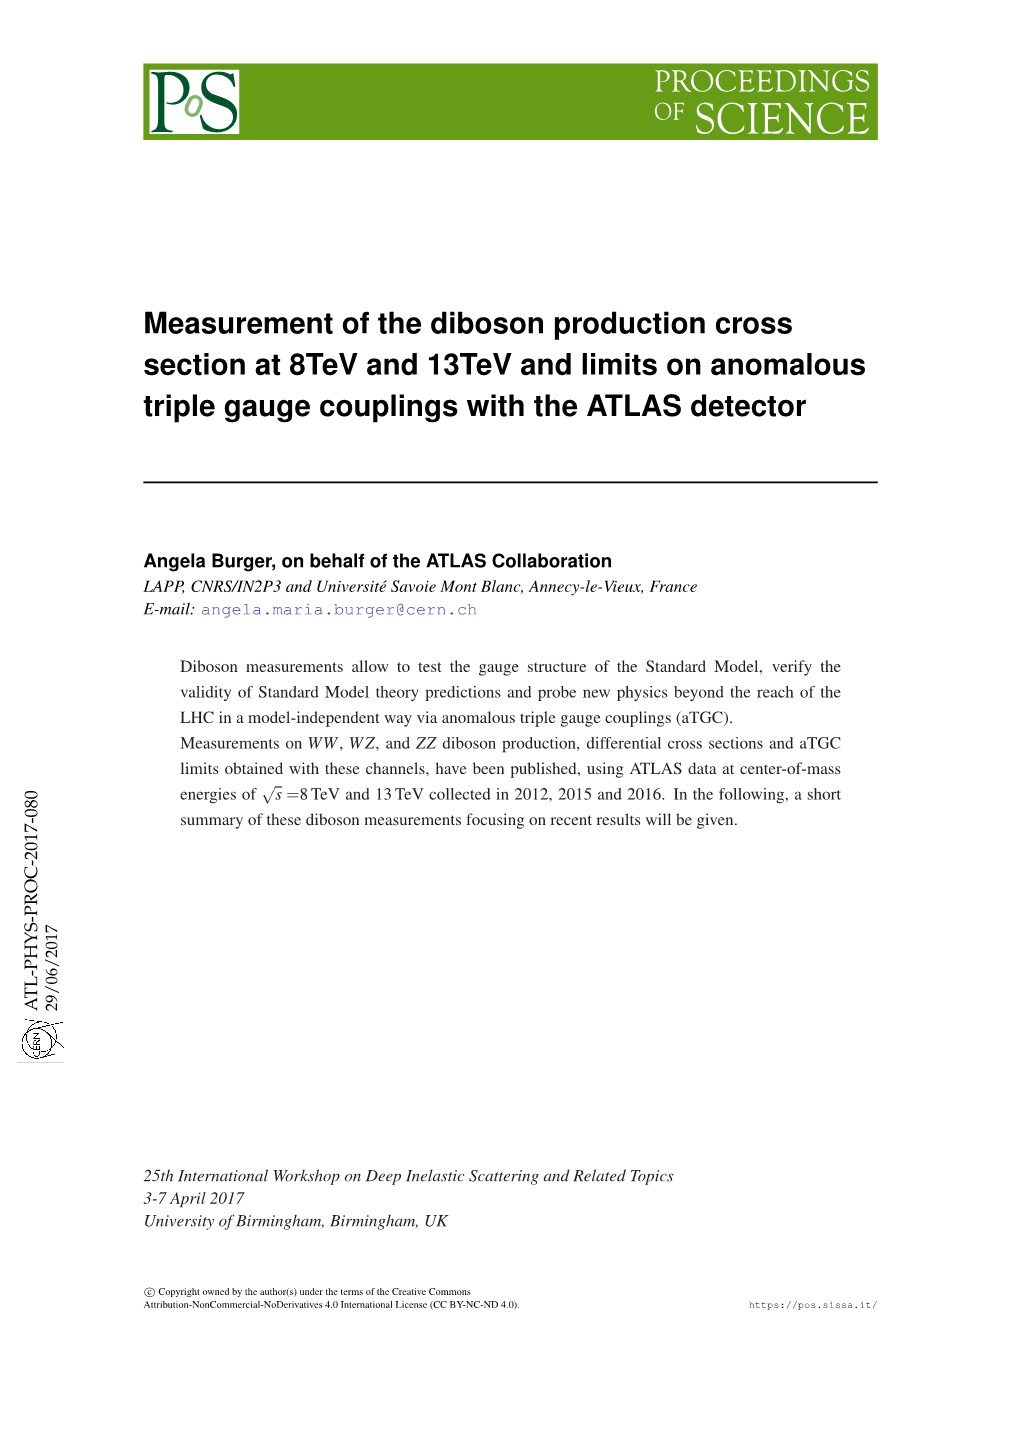 Measurement of the Diboson Production Cross Section at 8Tev and 13Tev and Limits on Atgc with the ATLAS Detector